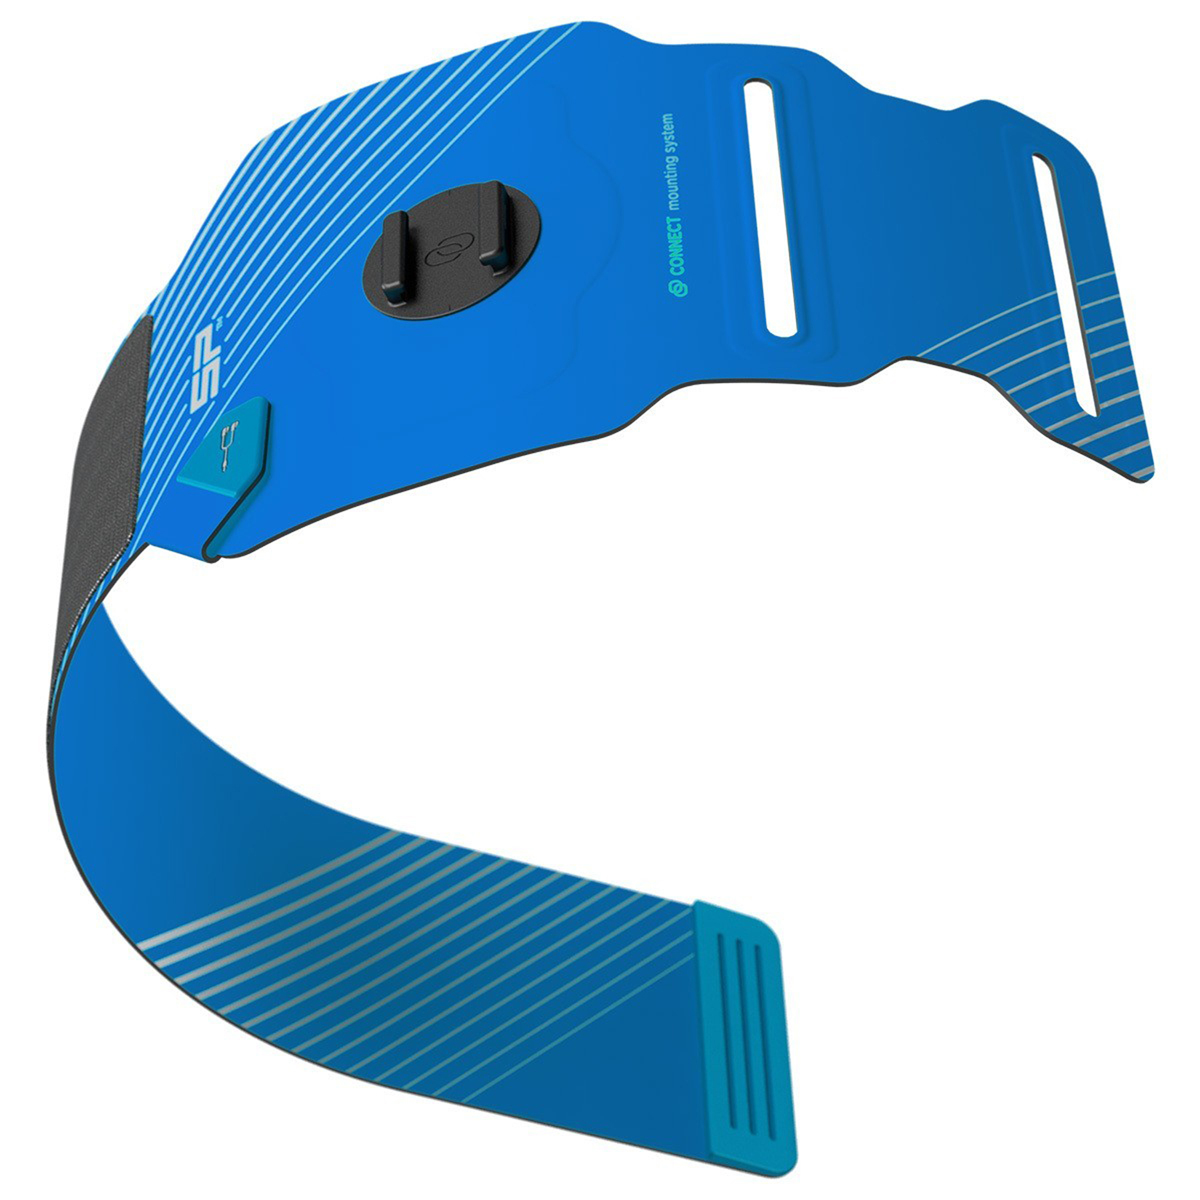 SP CONNECT SP Connect Running Blau Smartphone Band, Running